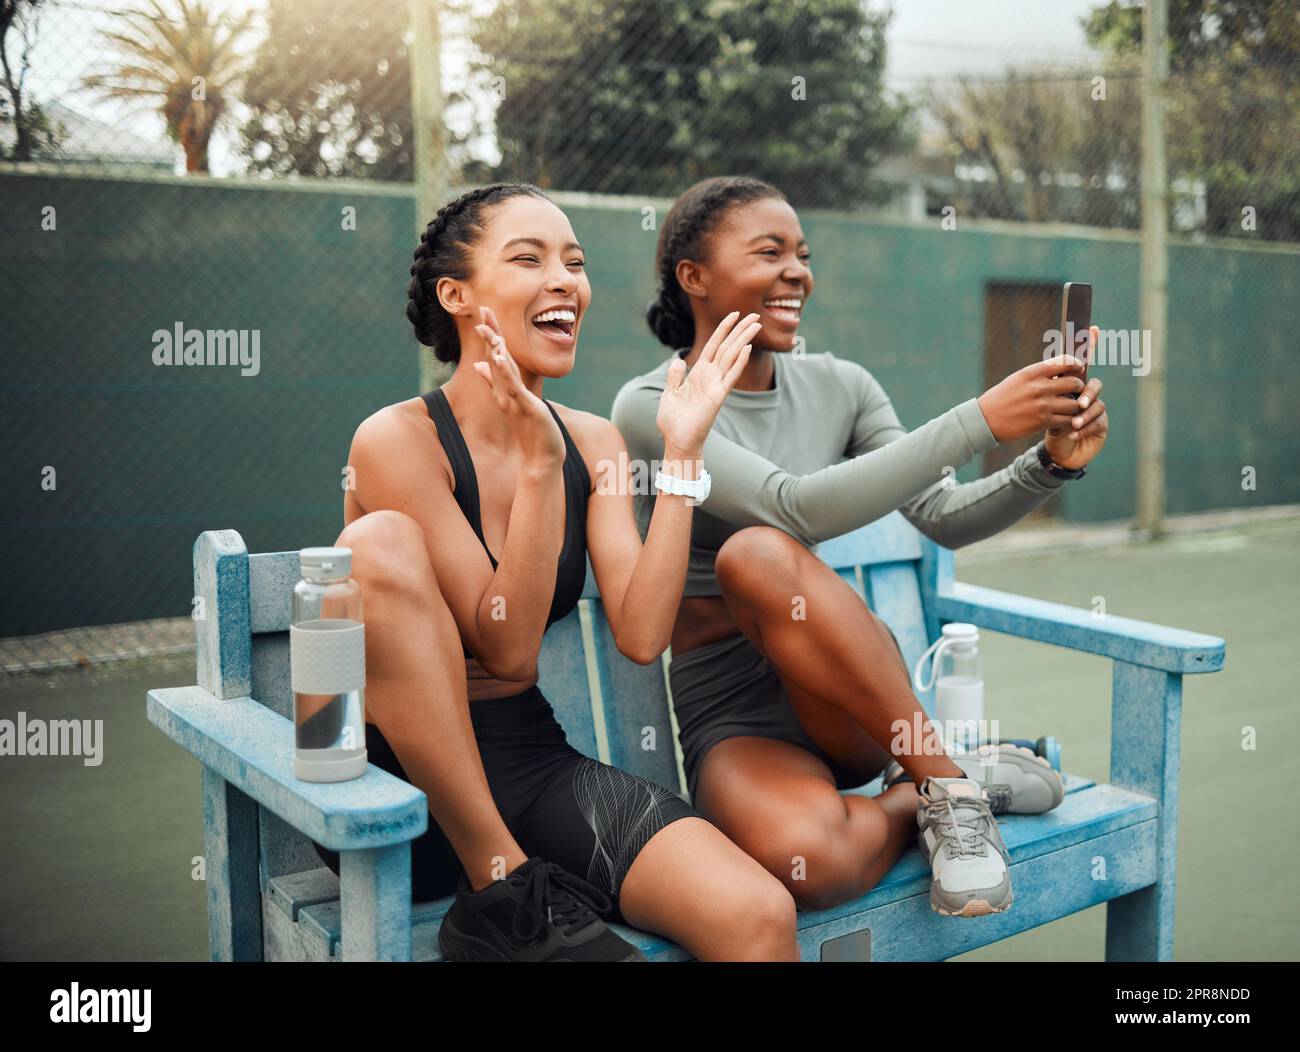 Cheering on their teammates. two attractive young female athletes sitting on a bench at a sports court watching a competition. Stock Photo